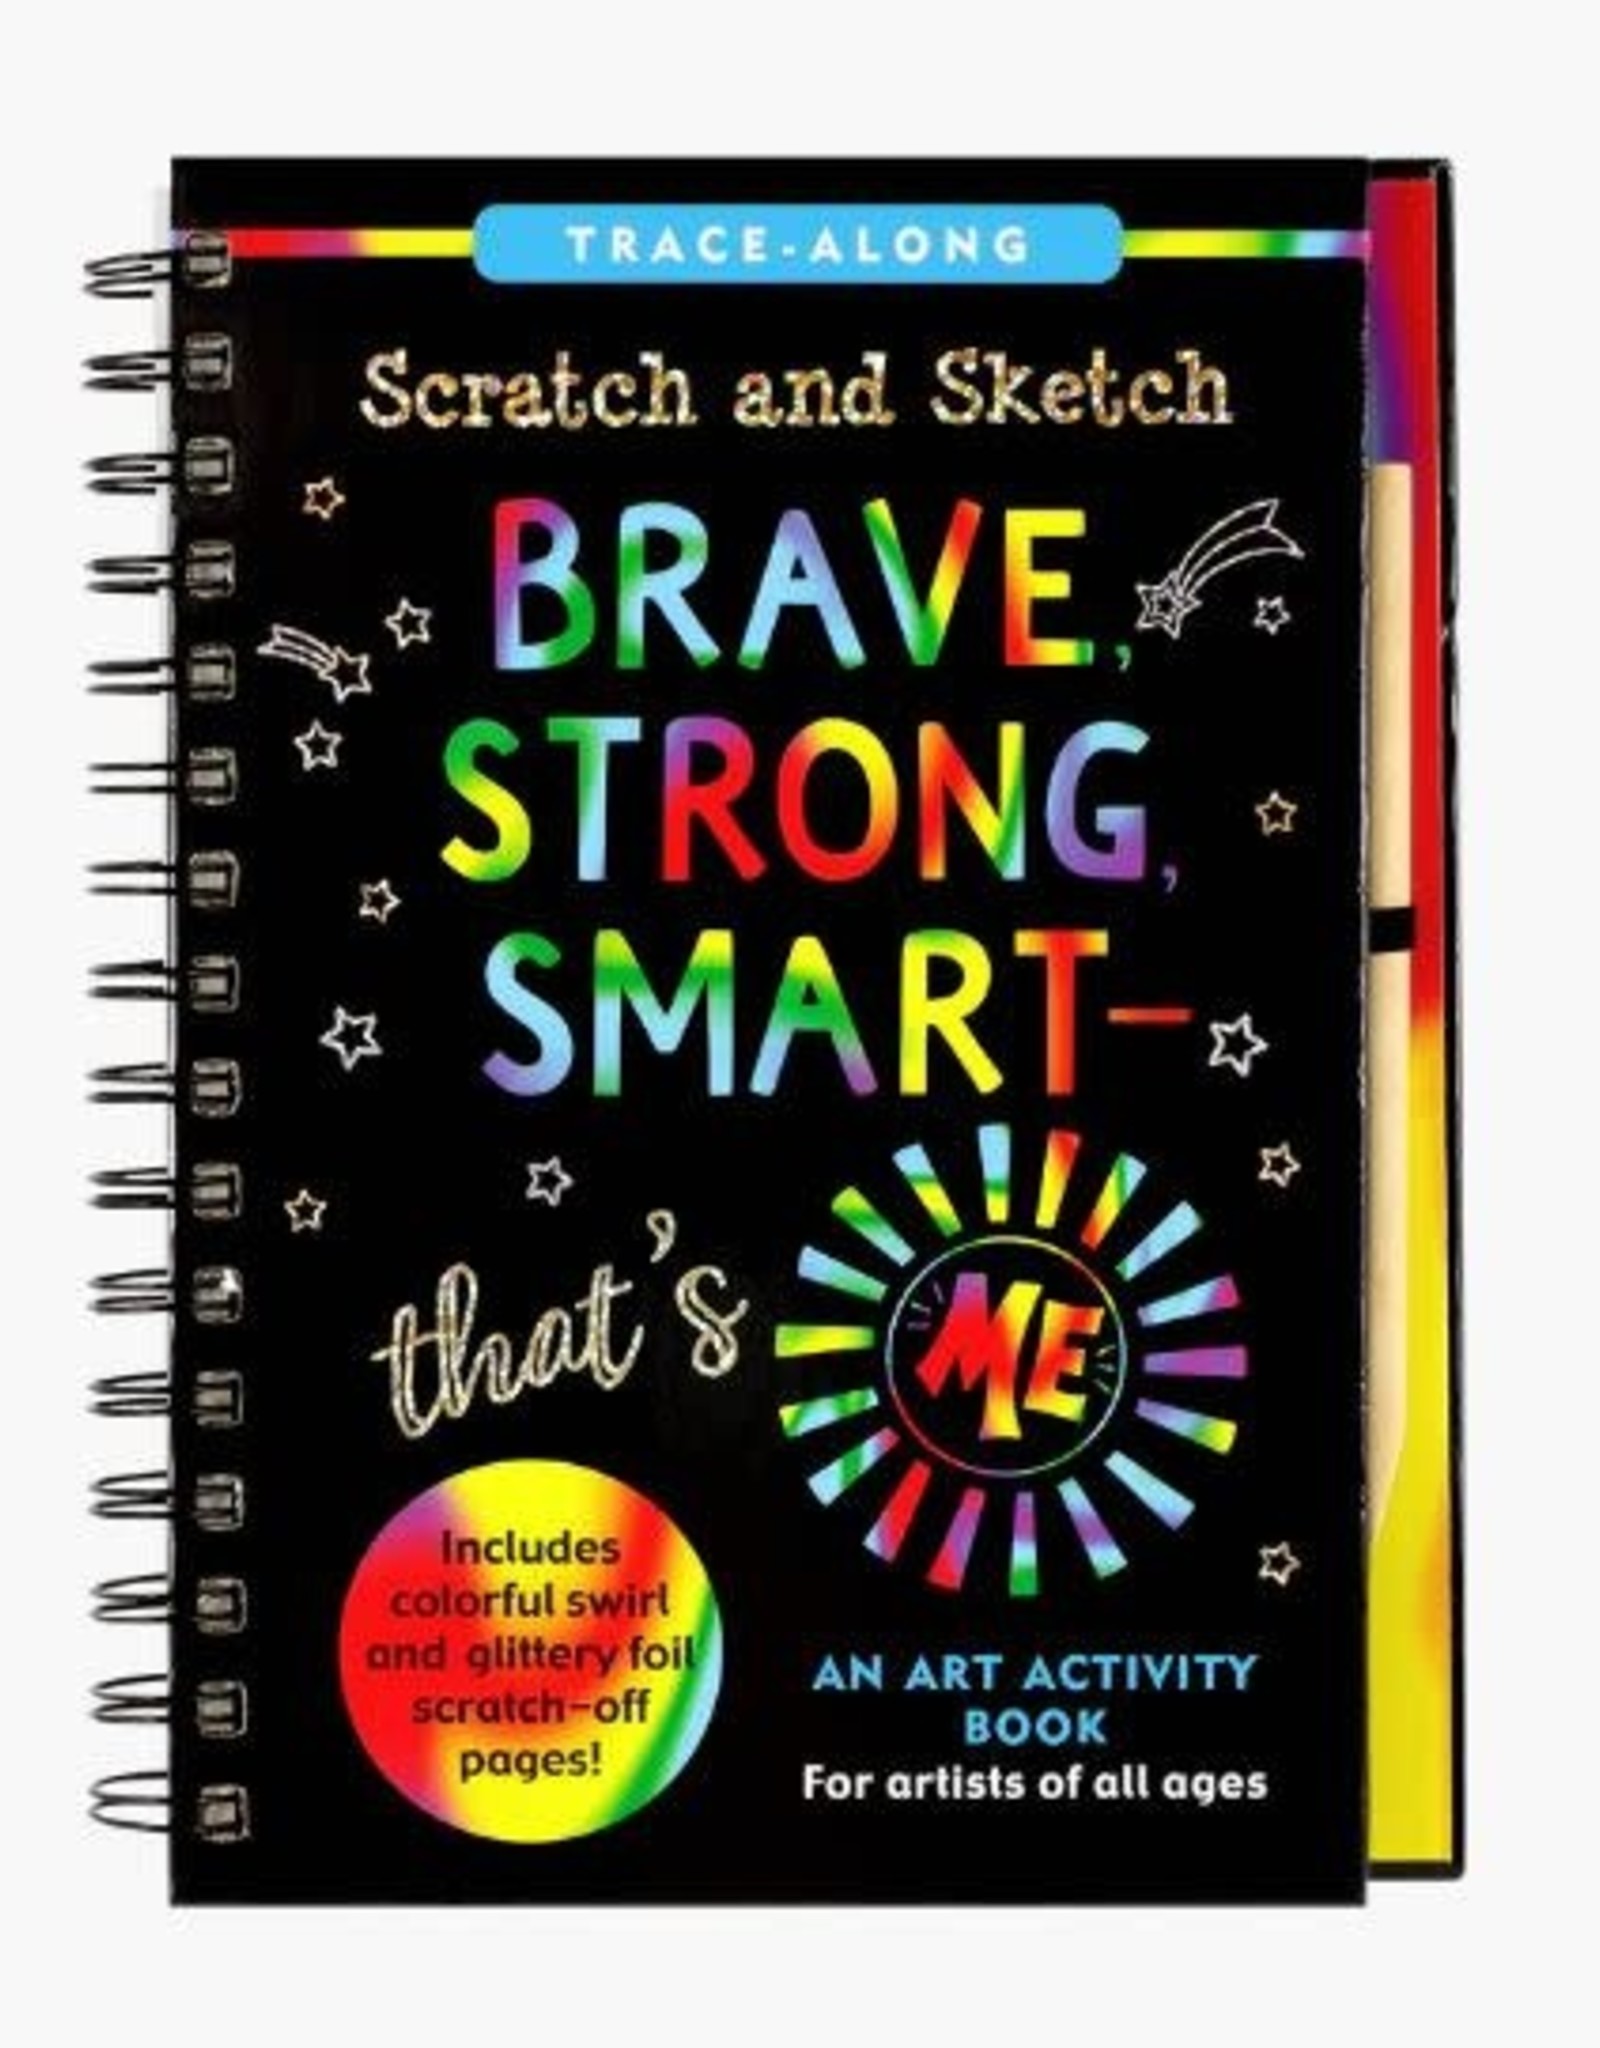 Peter Pauper Press BRAVE, STRONG, SMART -- THAT'S ME! SCRATCH AND SKETCH